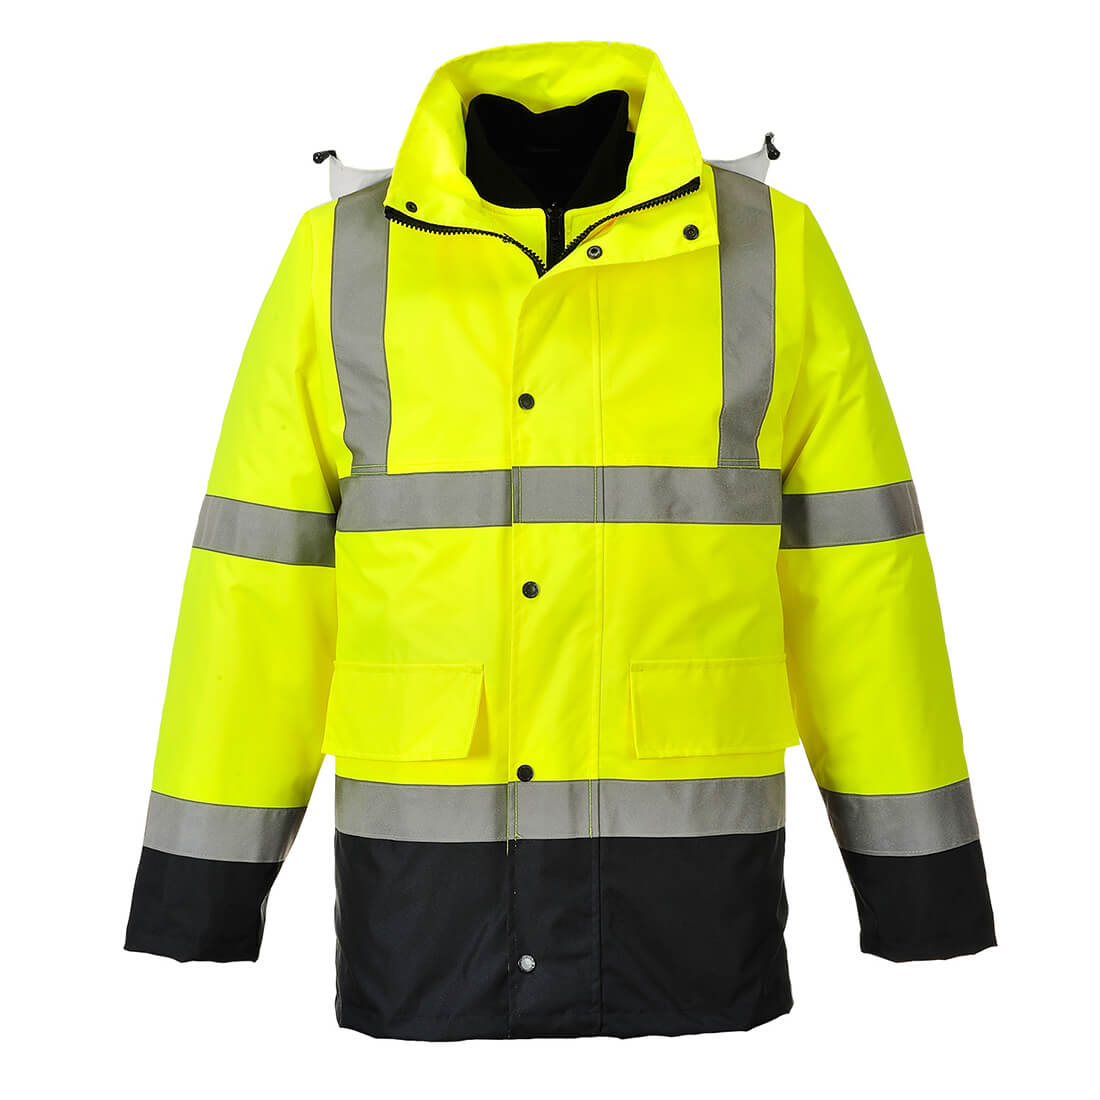 Image of Oxford Weave 300D Class 3 Hi Vis 4-in-1 Traffic Jacket Yellow / Navy 3XL